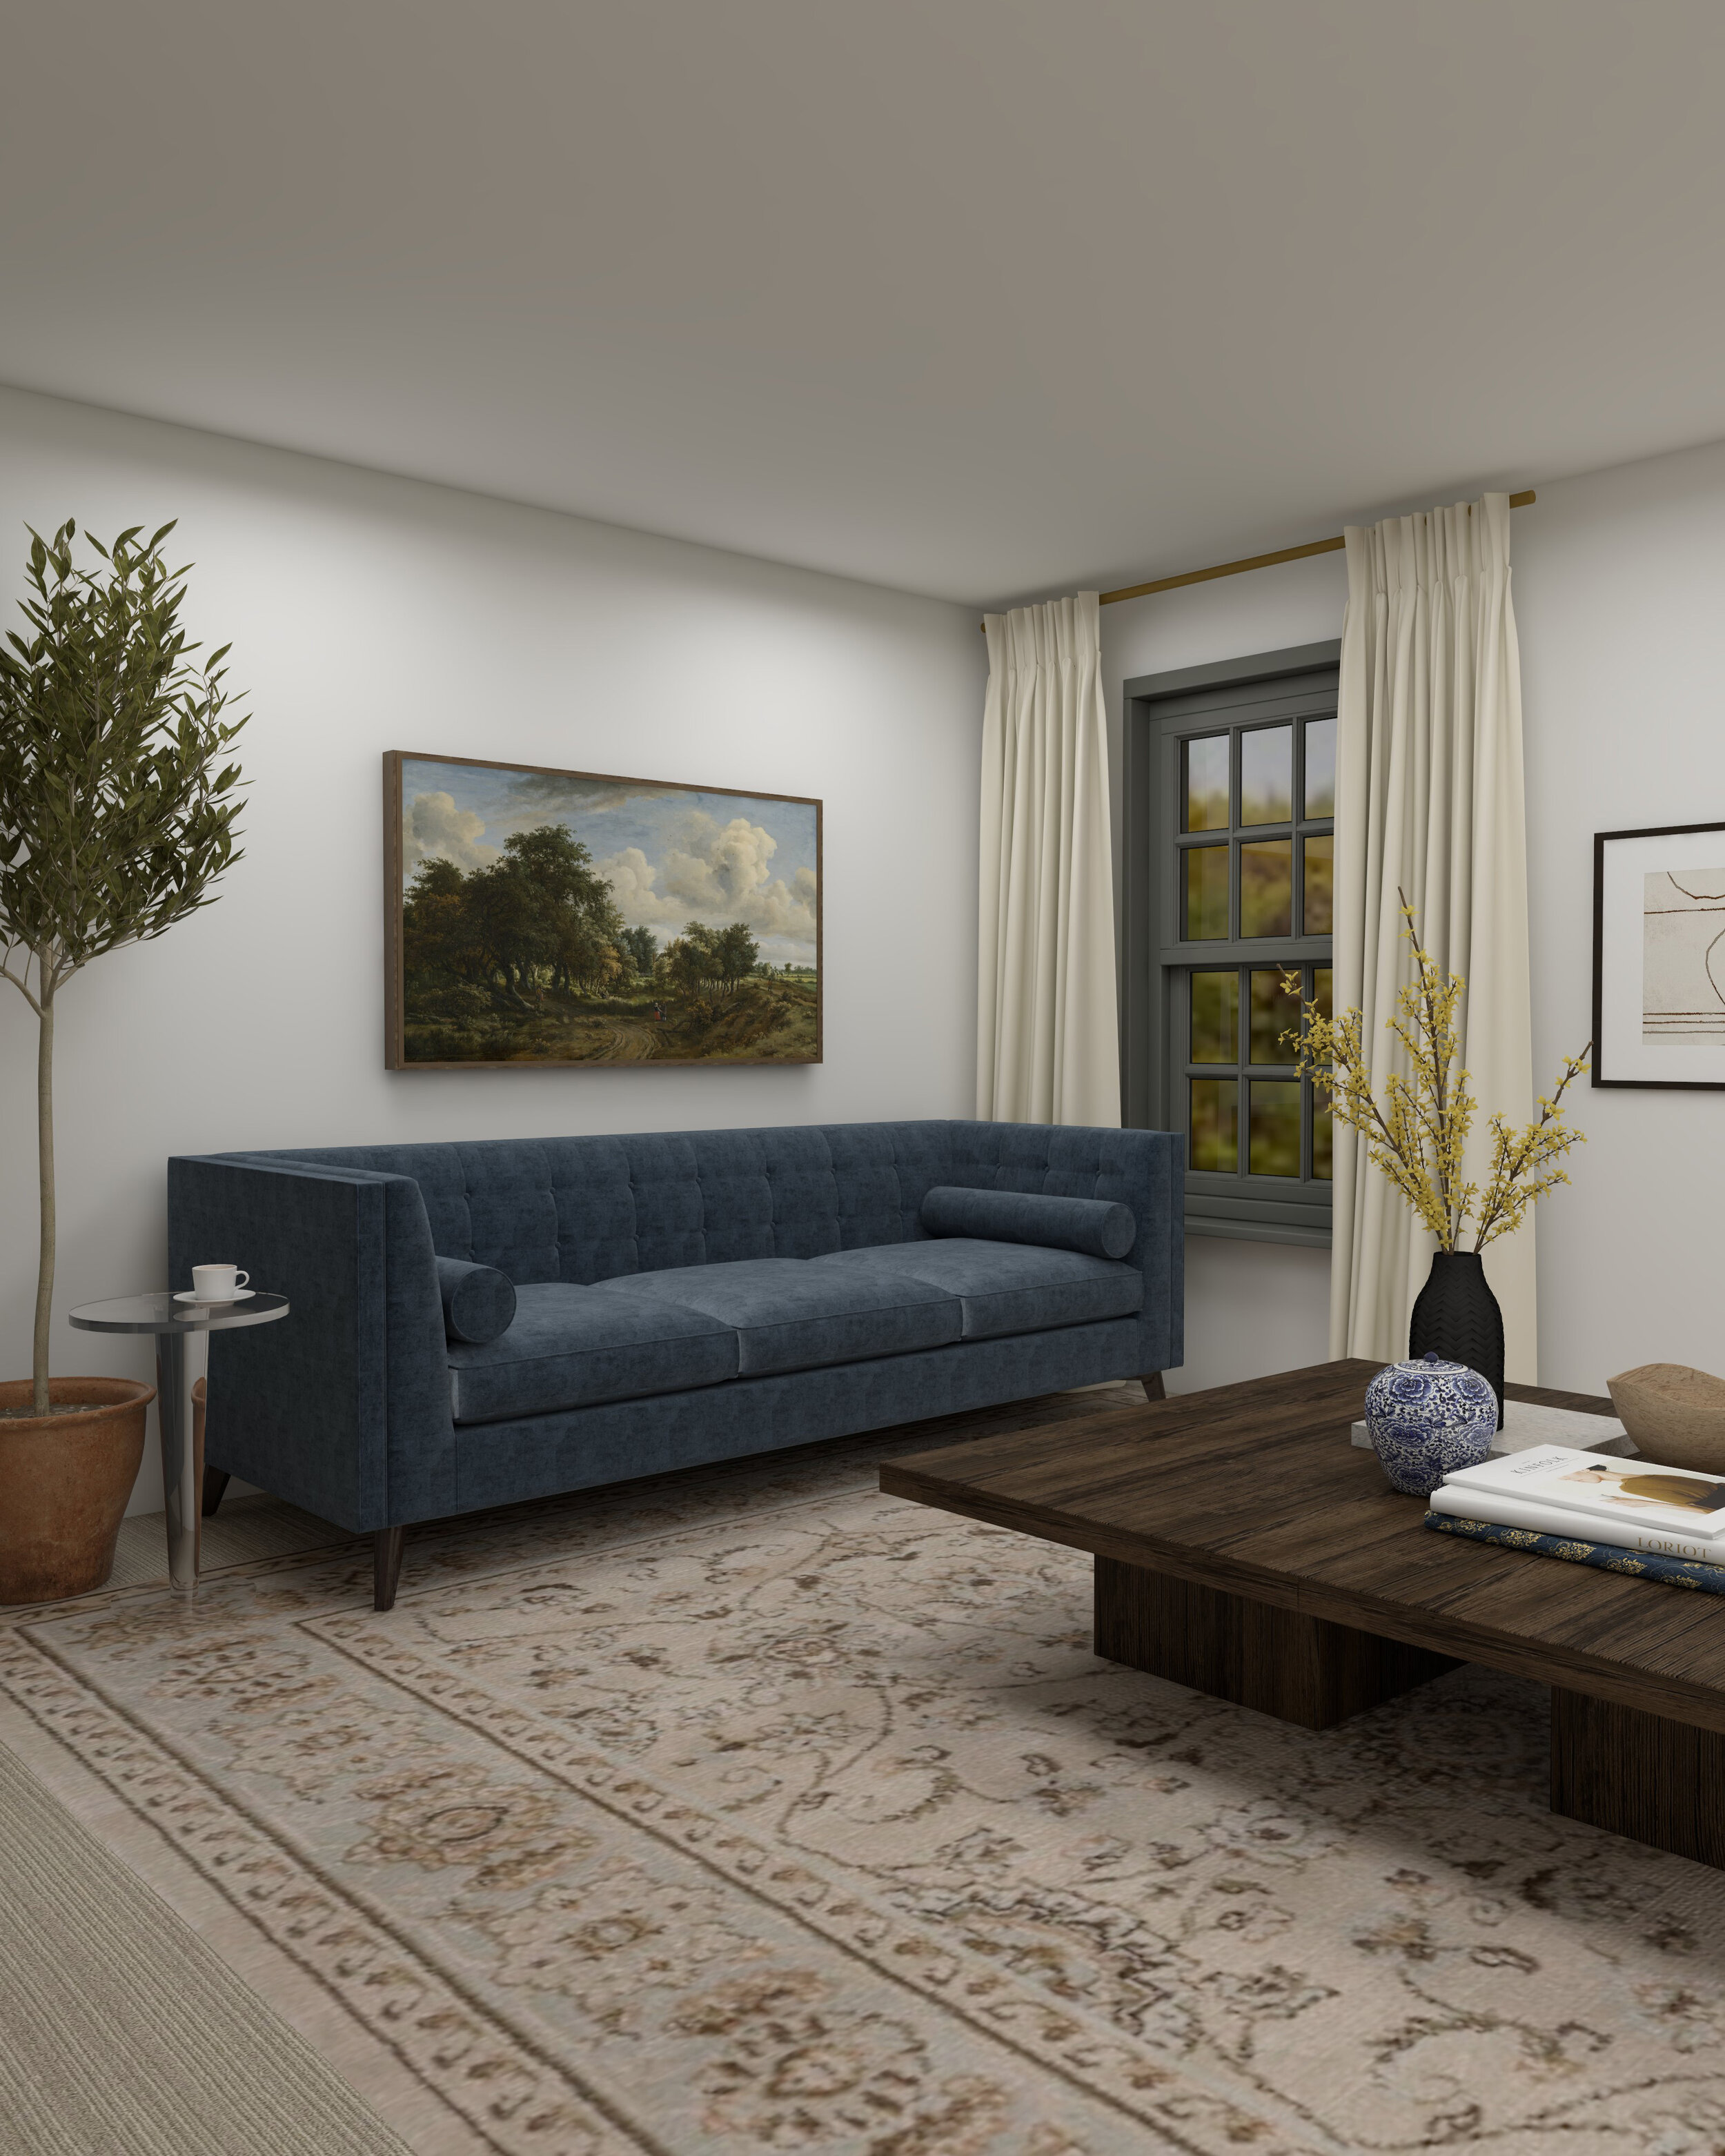 Reader Room Virtual Makeover - A cookie cutter living room makeover by Nadine Stay. Turning this basic living room into a bold and bright designer space. How to add personality to a builder grade home. Contrast trim and a rich blue and orange color …